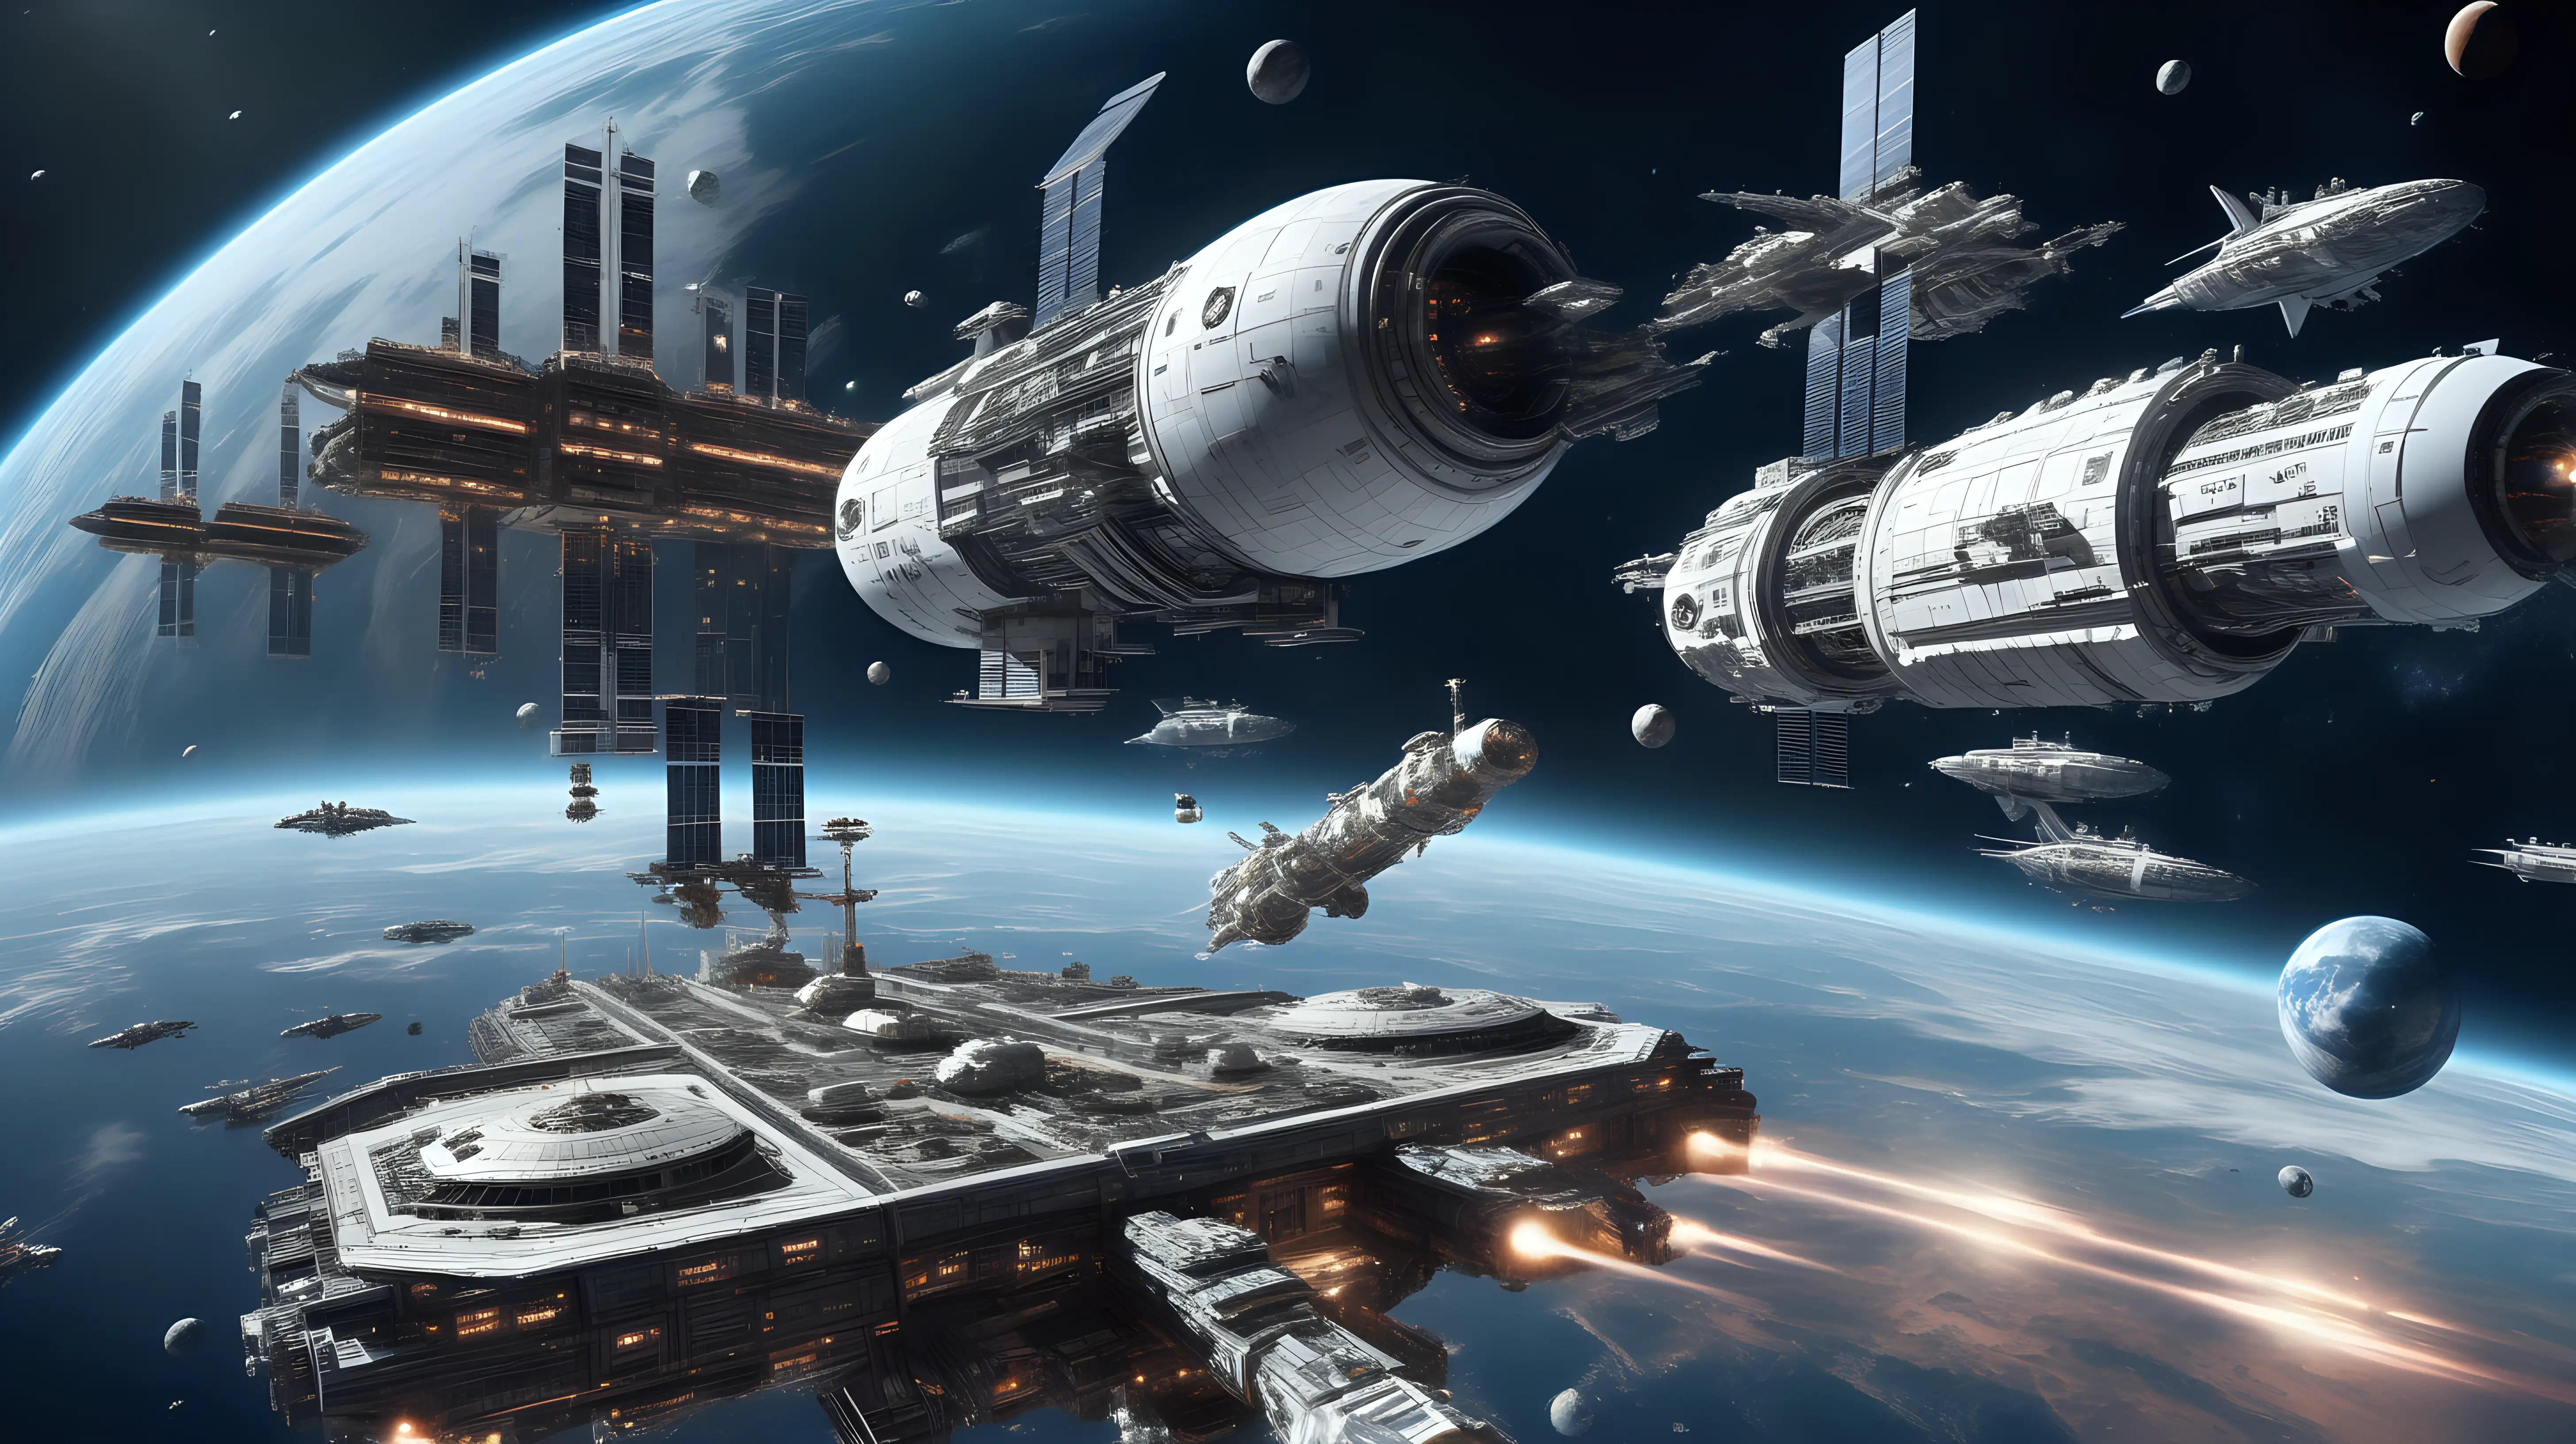 Intricate Space Armada Converging on Massive Fortified Space Station